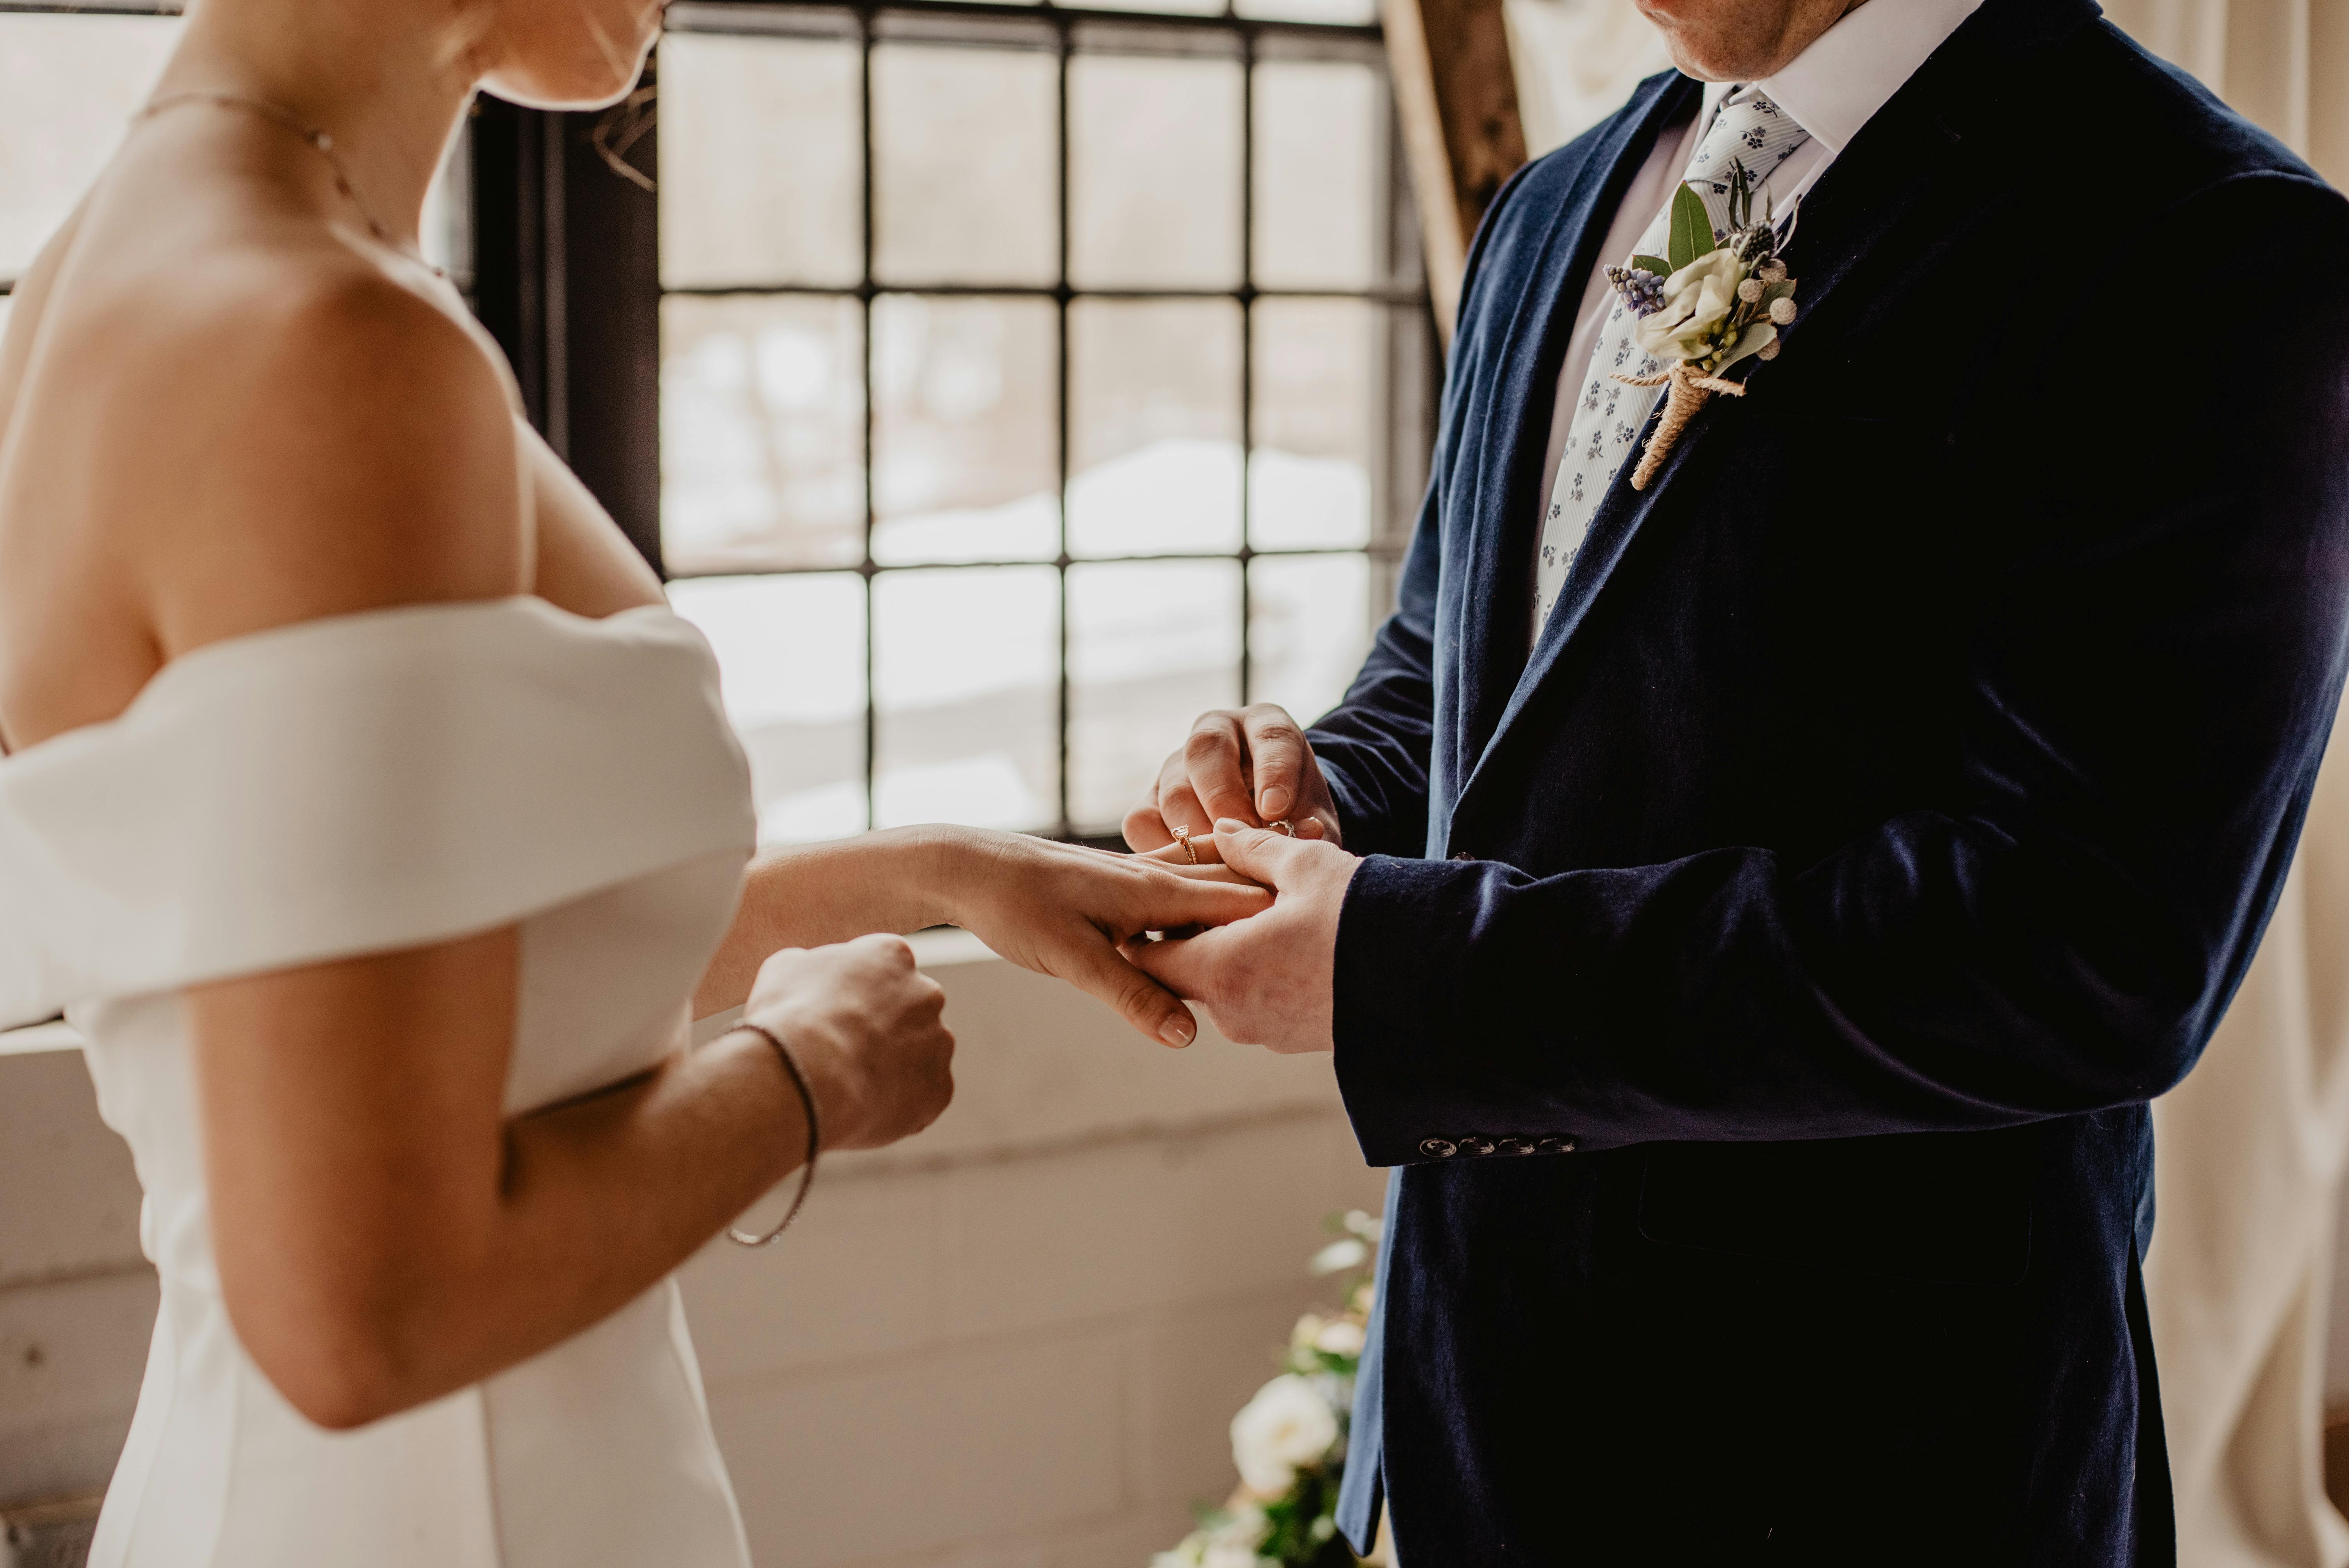 A newlywed couple exchanging wedding rings | Source: Pexels